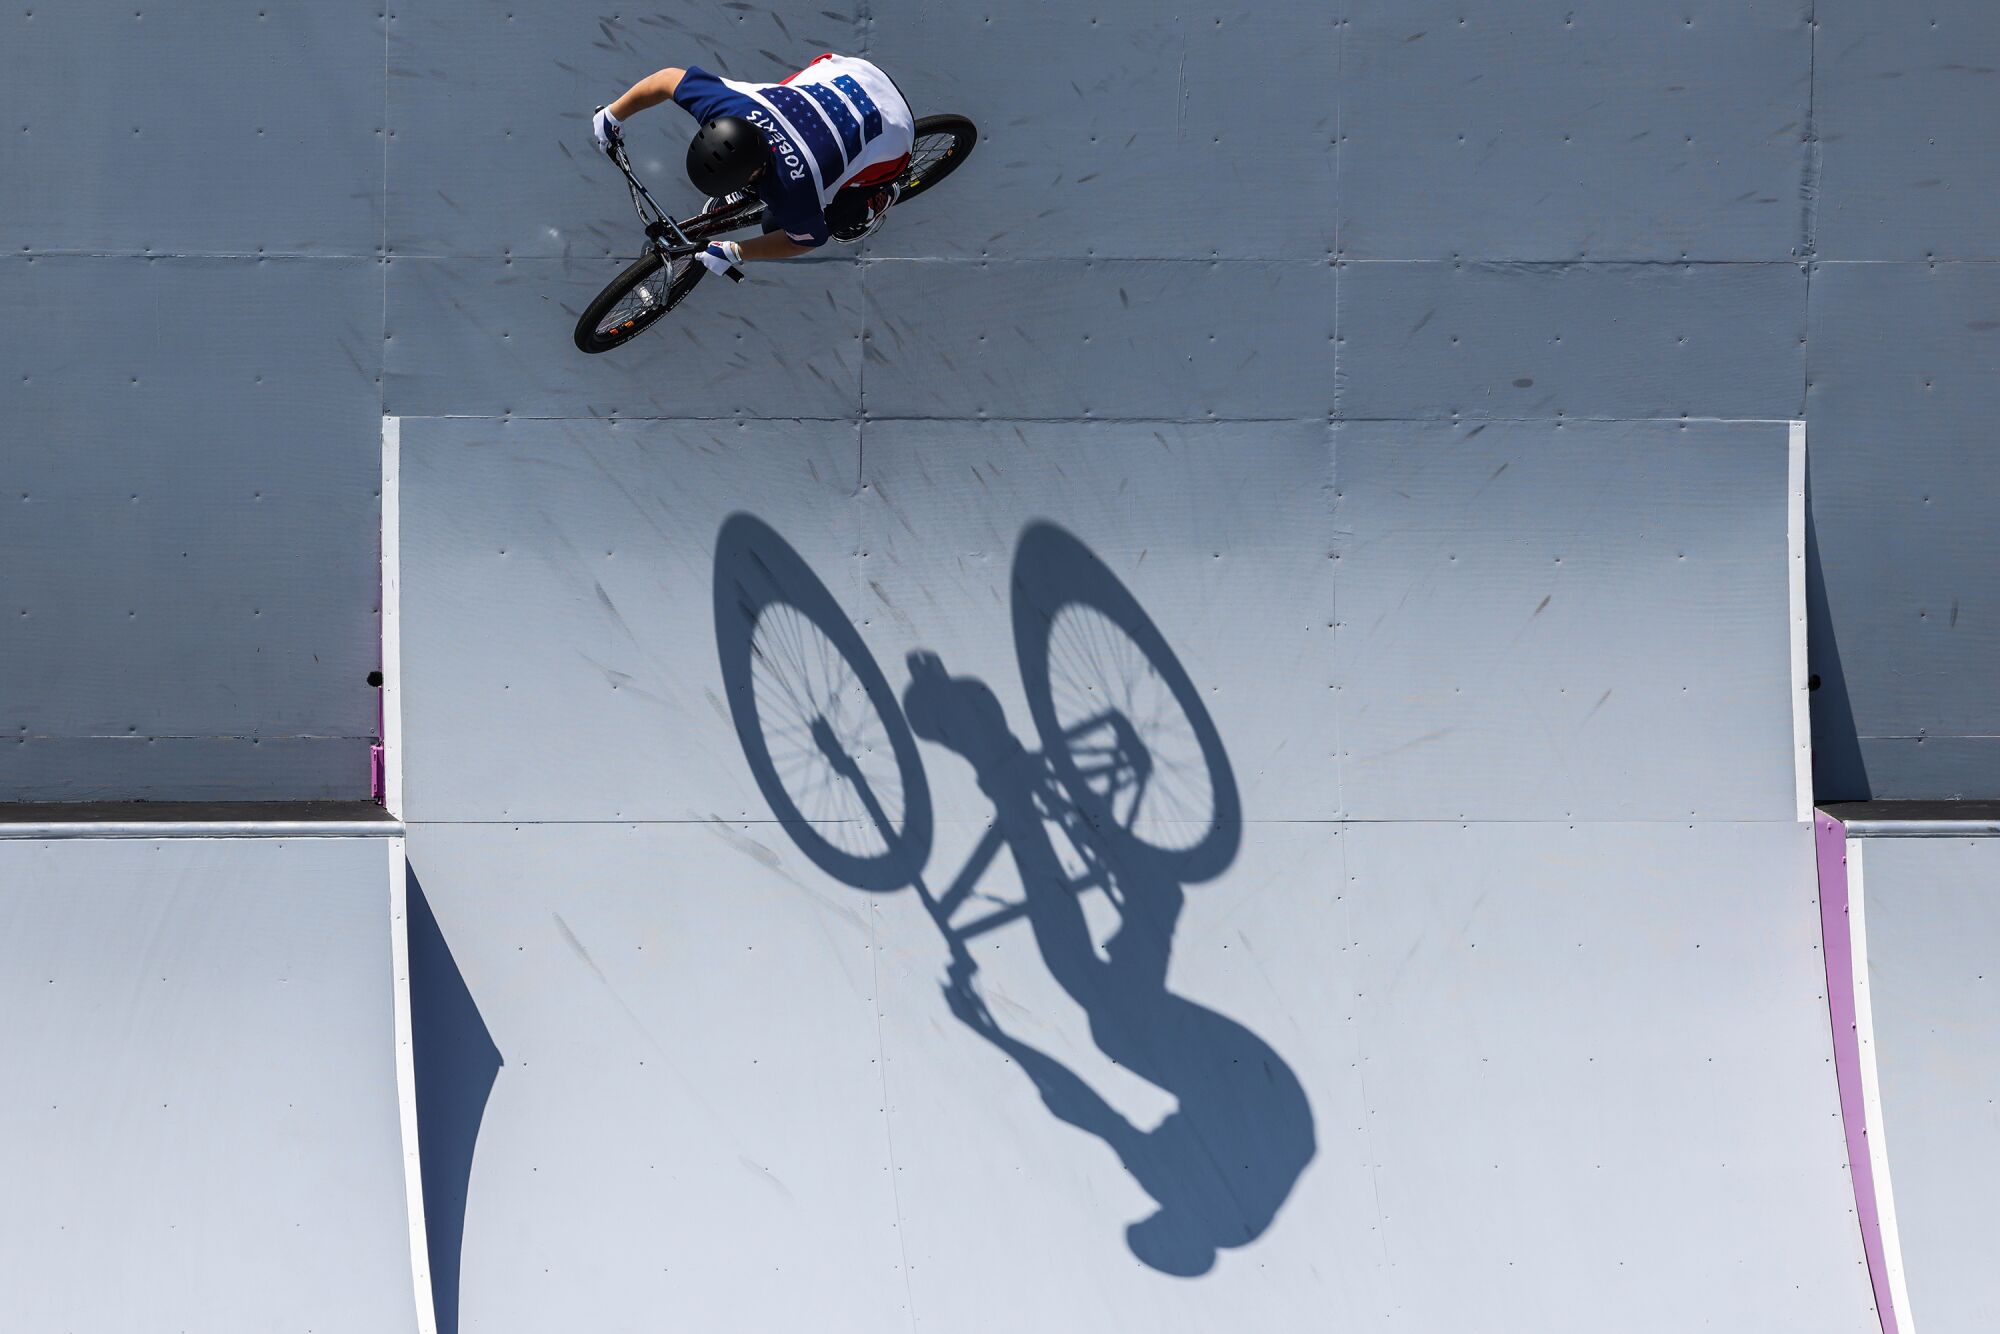 USA rider Hannah Roberts in her first run at the Women's BMX Freestyle Finals.